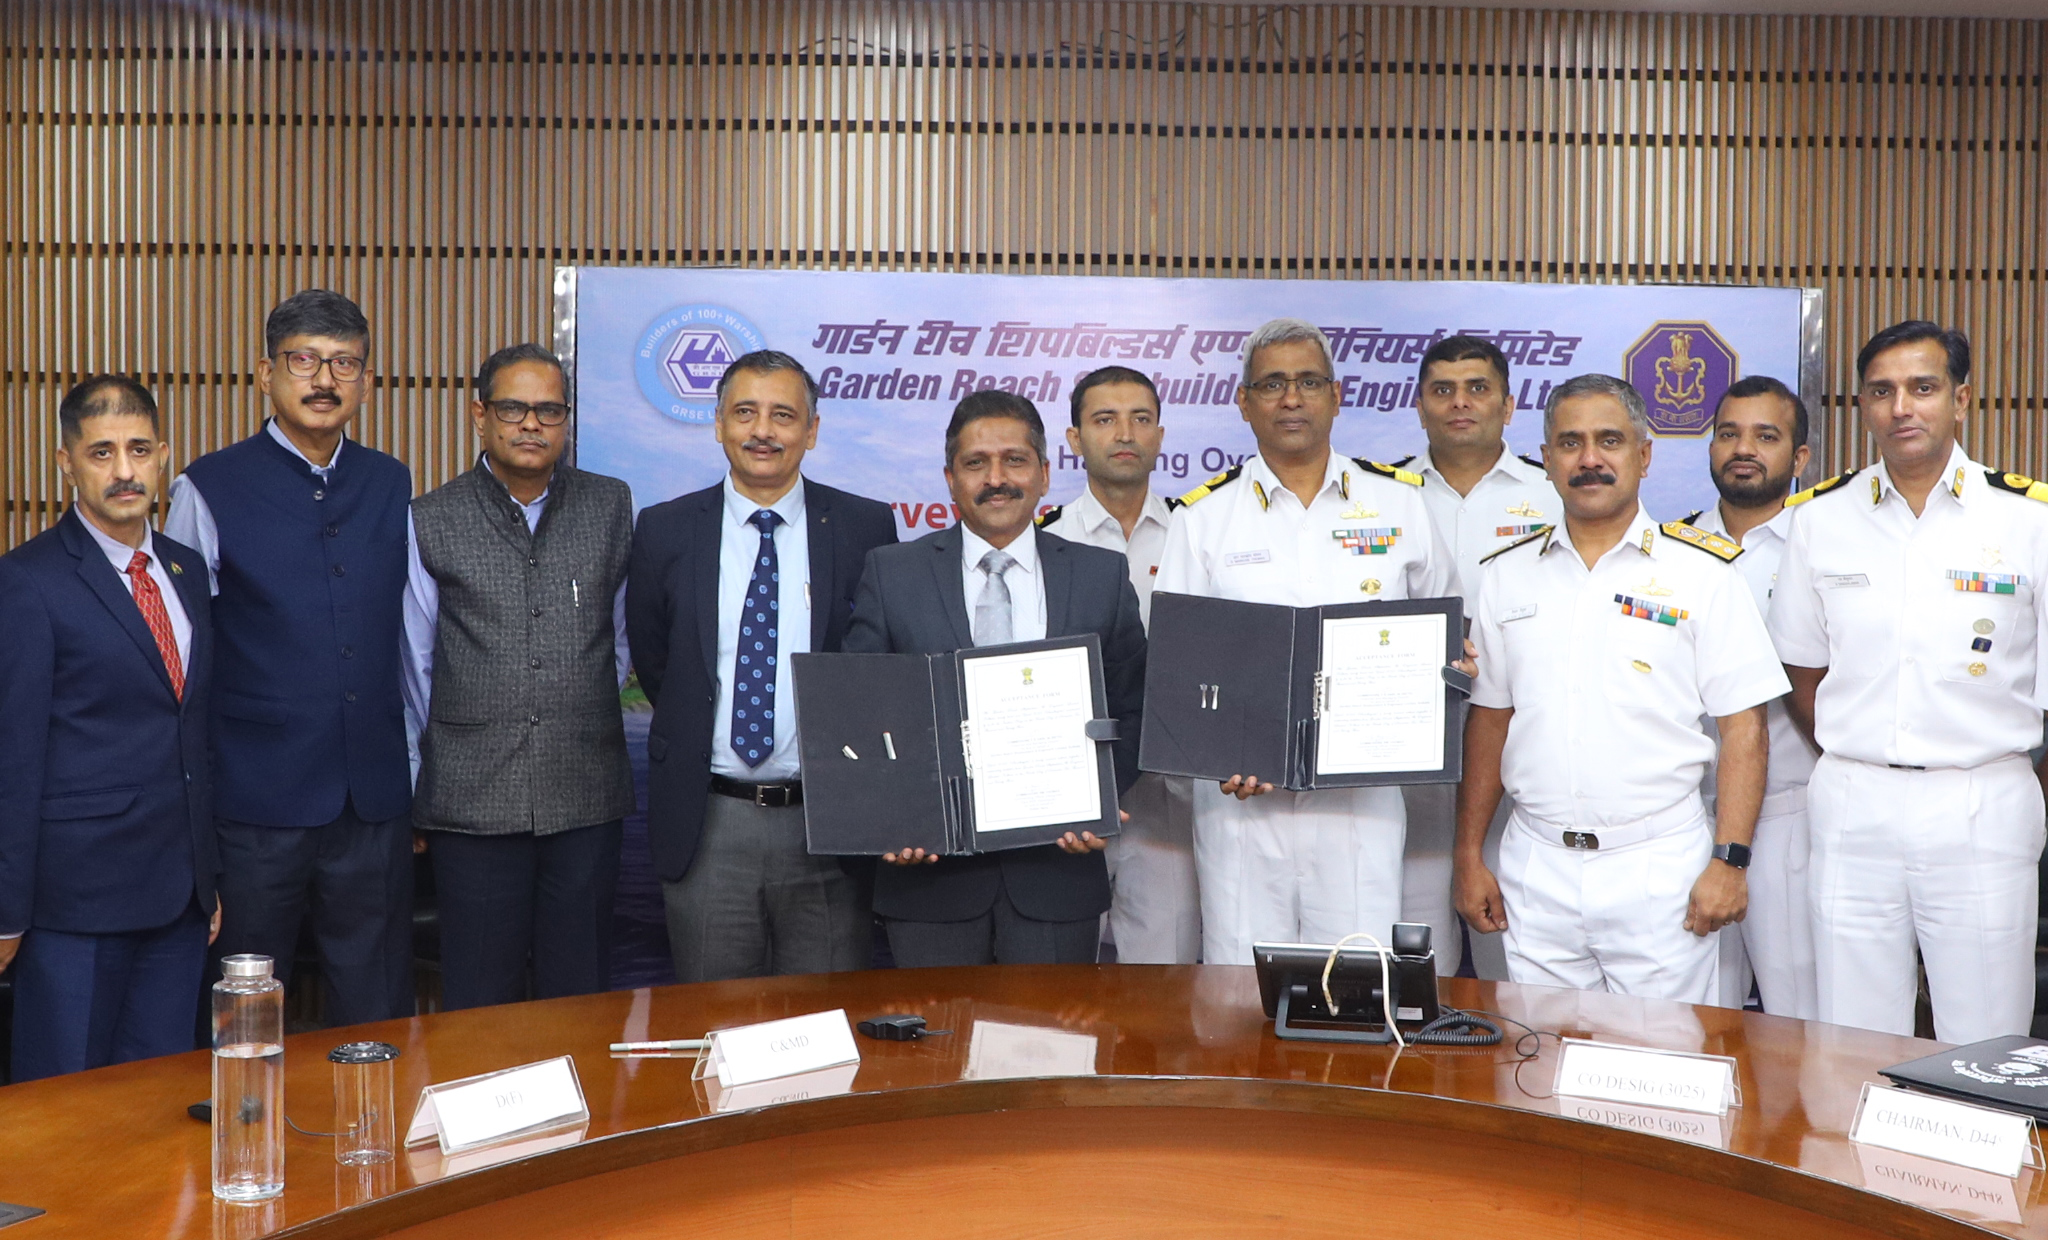 A Birthday Boost for Indian Navy – GRSE Delivers “Largest Ever Survey Vessel to be built in the Country - INS Sandhayak” on the Navy Day 2023 on 04 Dec 23